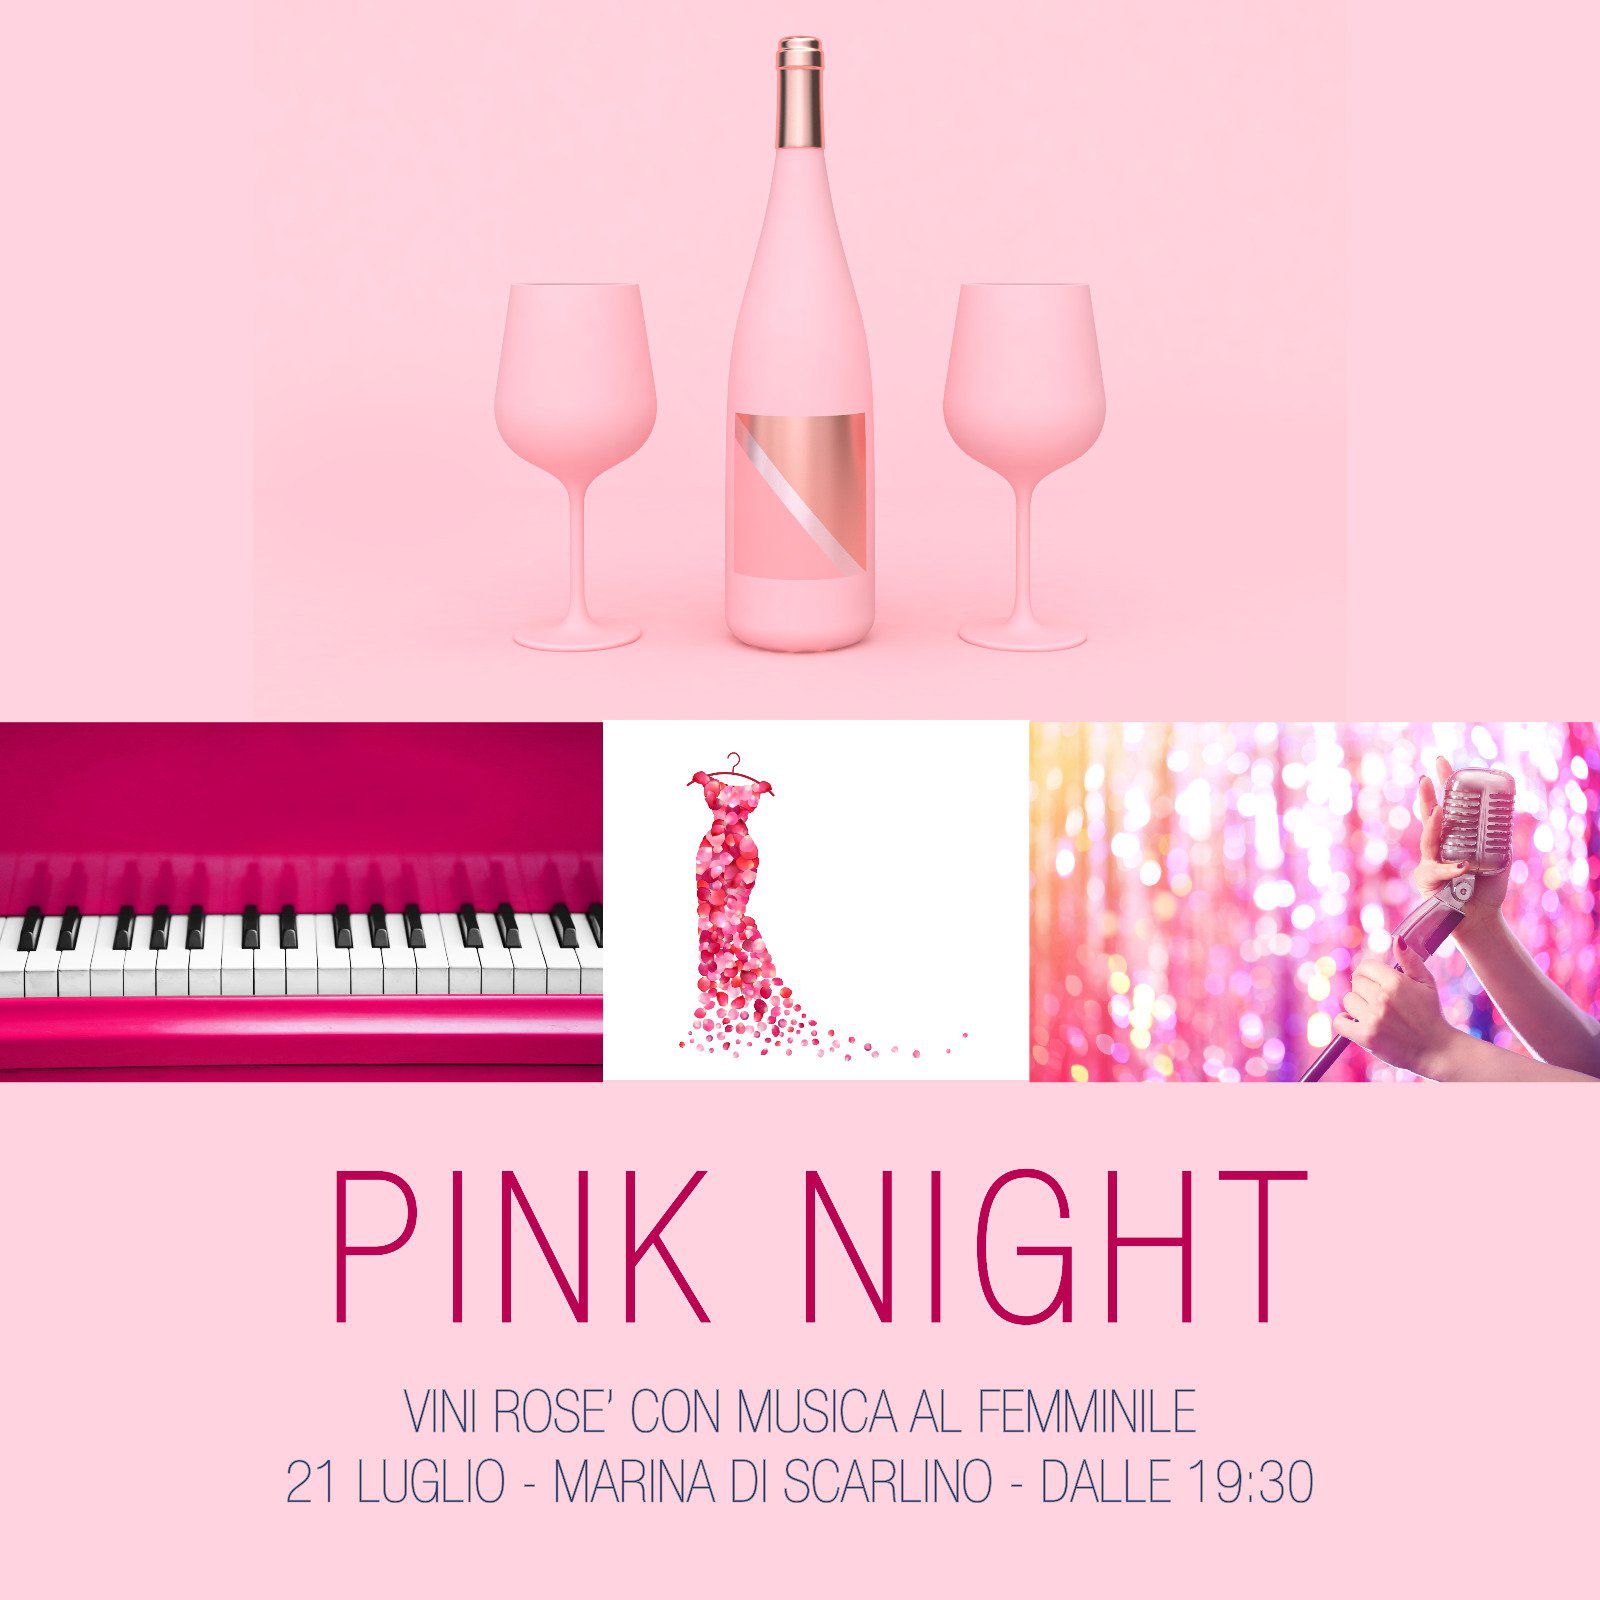 THURSDAY 24 AUGUST - PINK NIGHT THROUGHOUT THE MARINA! 1